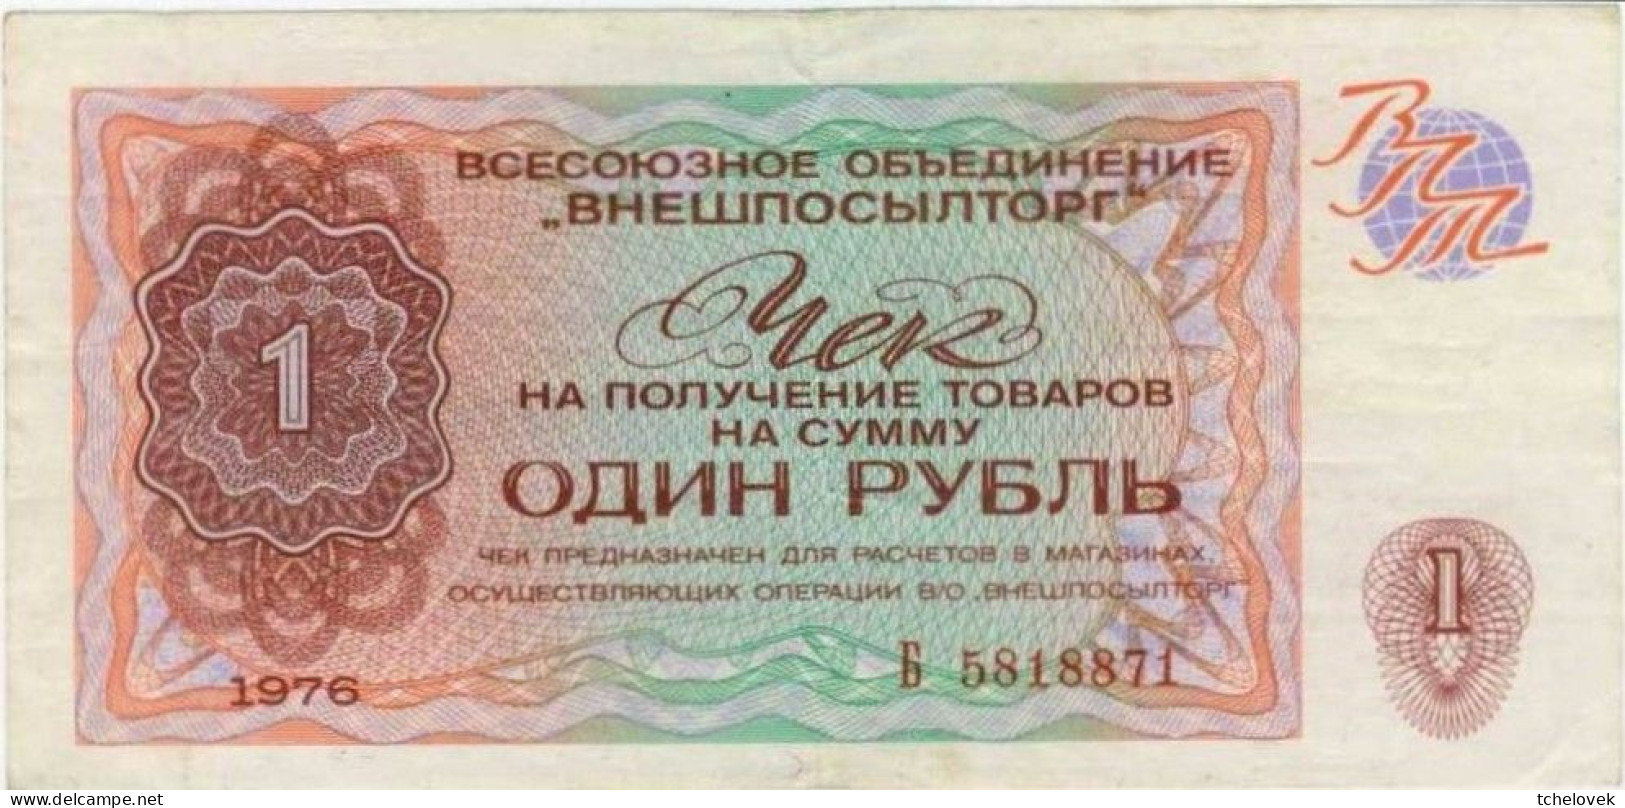 (Billets). Russie Russia URSS USSR Vneshposiltorg 1 Rouble 1976 N° B 5818871. Foreign Exchange Certificate Serie A - Russia